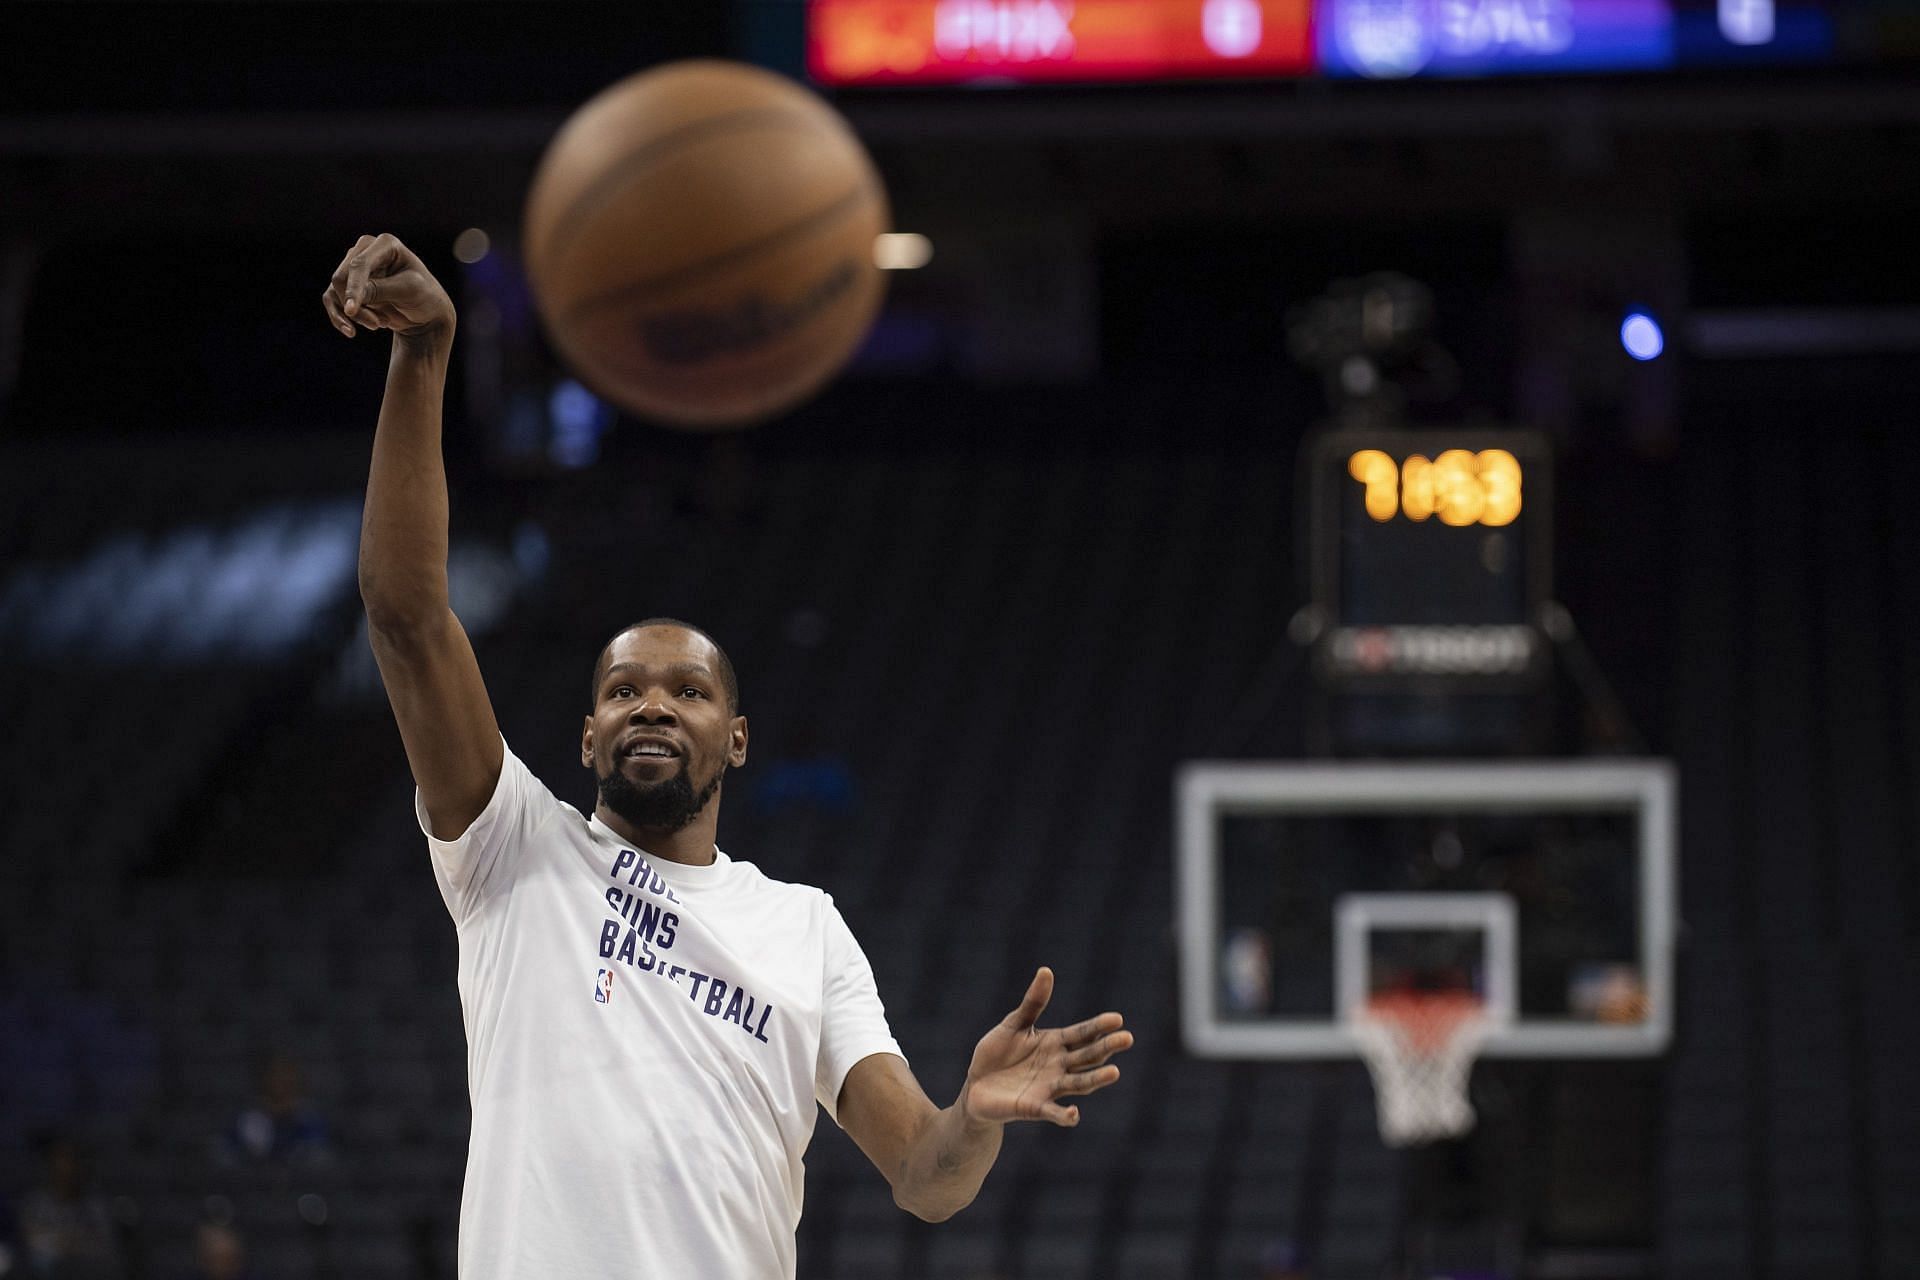 Has Kevin Durant asked for a trade from the Phoenix Suns? Disproving rumors surrounding the 2-time NBA champion’s dissatisfaction with the team.